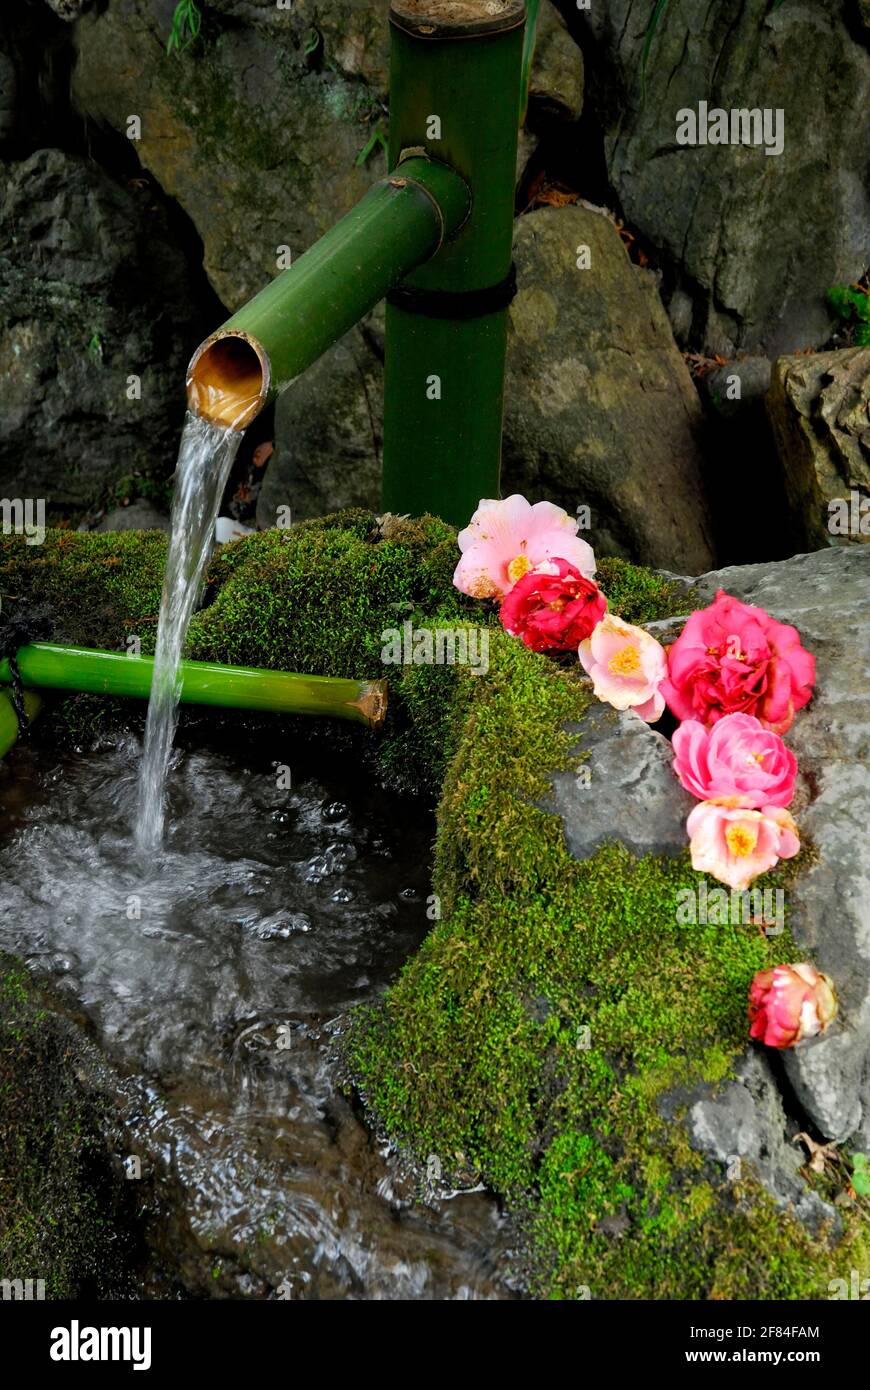 Fountain with mossy stones and camellia flowers, Kyoto, Japan Stock Photo